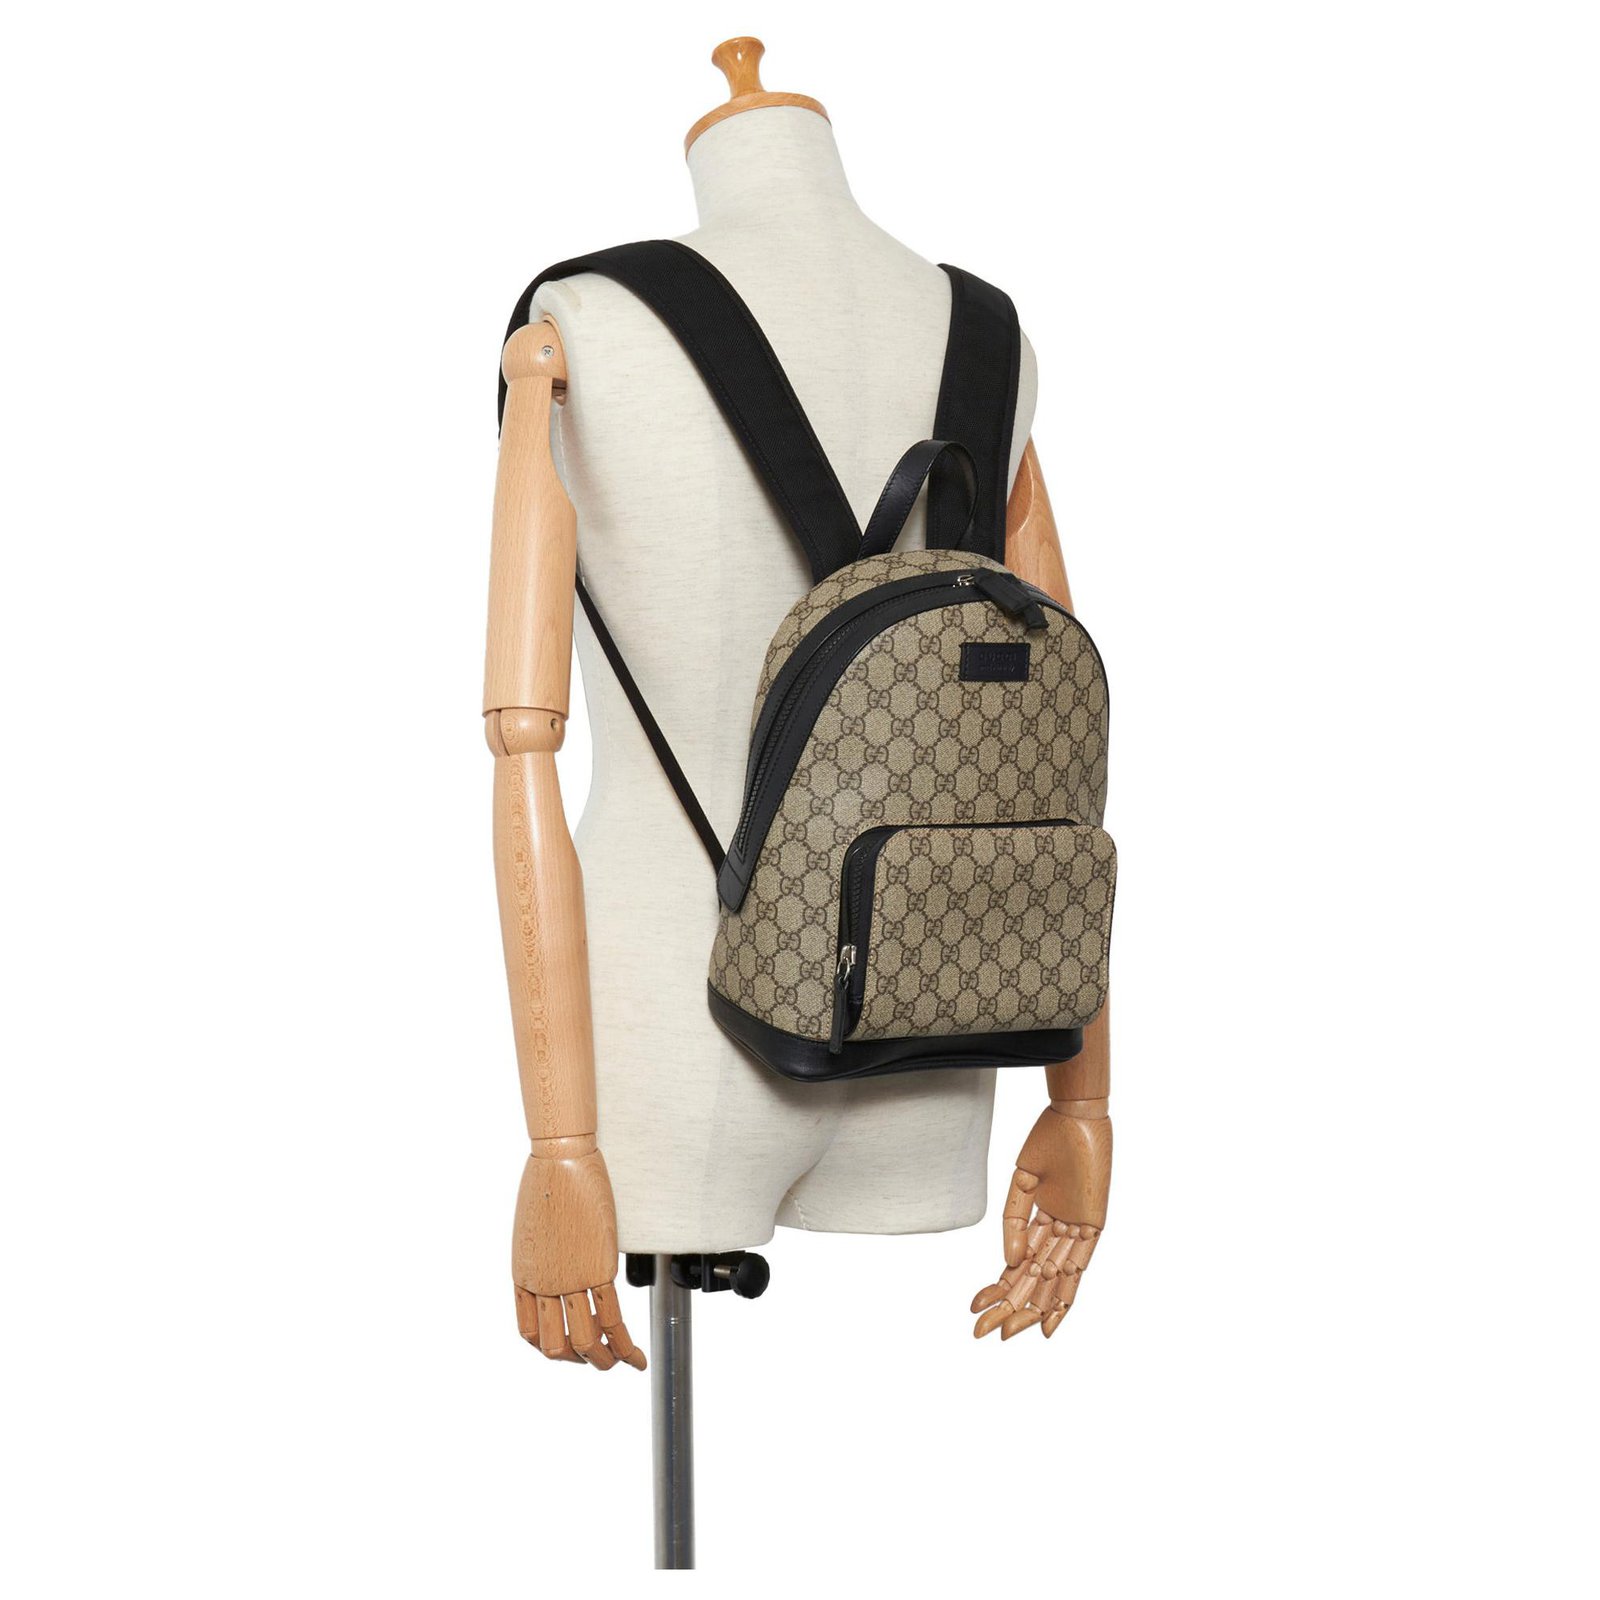 GUCCI GG Supreme Small Backpack Leather Beige Black 429020 -USED